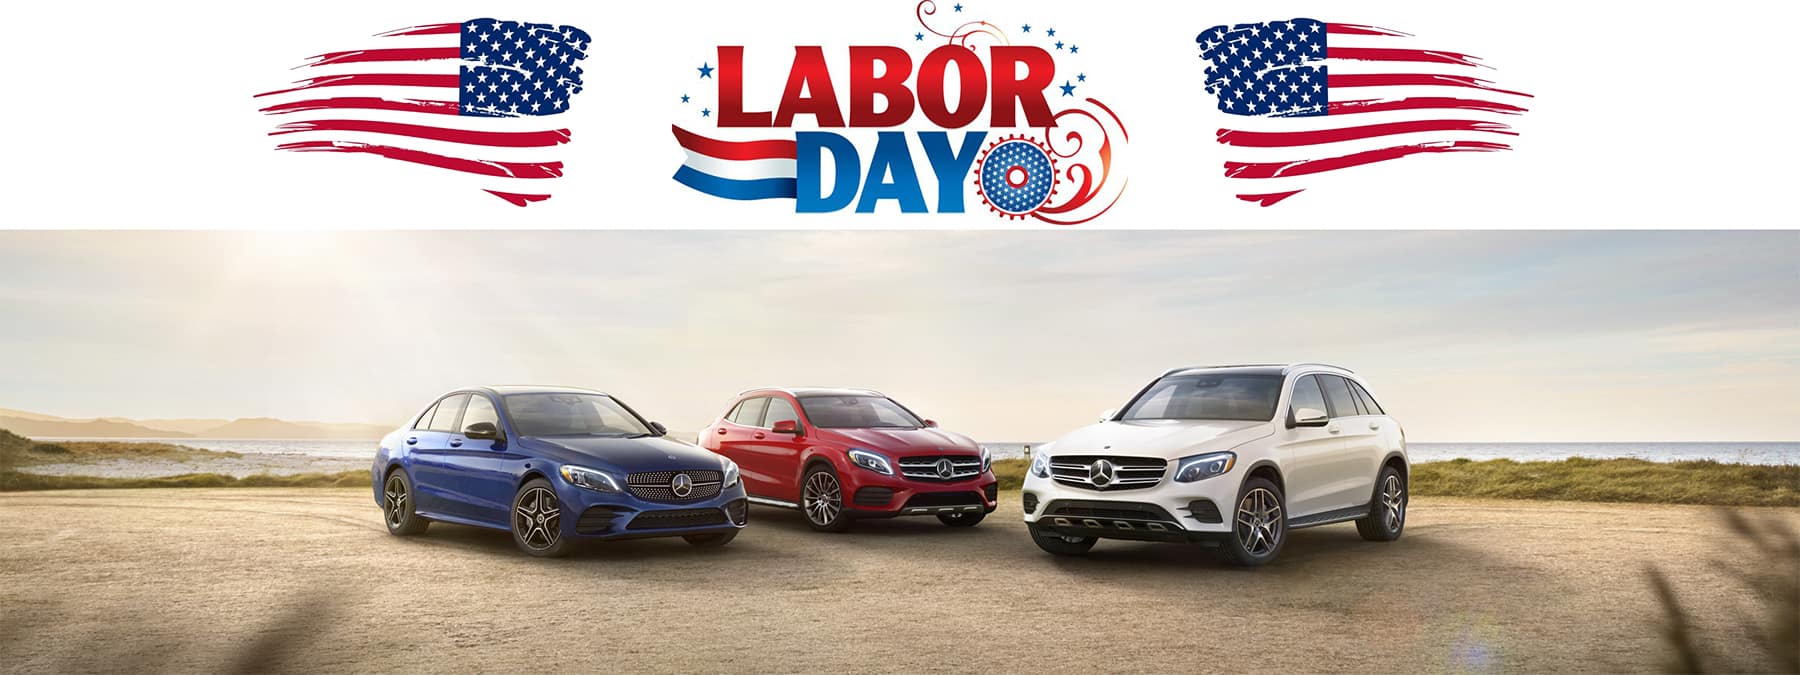 Are Car Dealerships Open on Labor Day? Understanding Holiday Business Hours